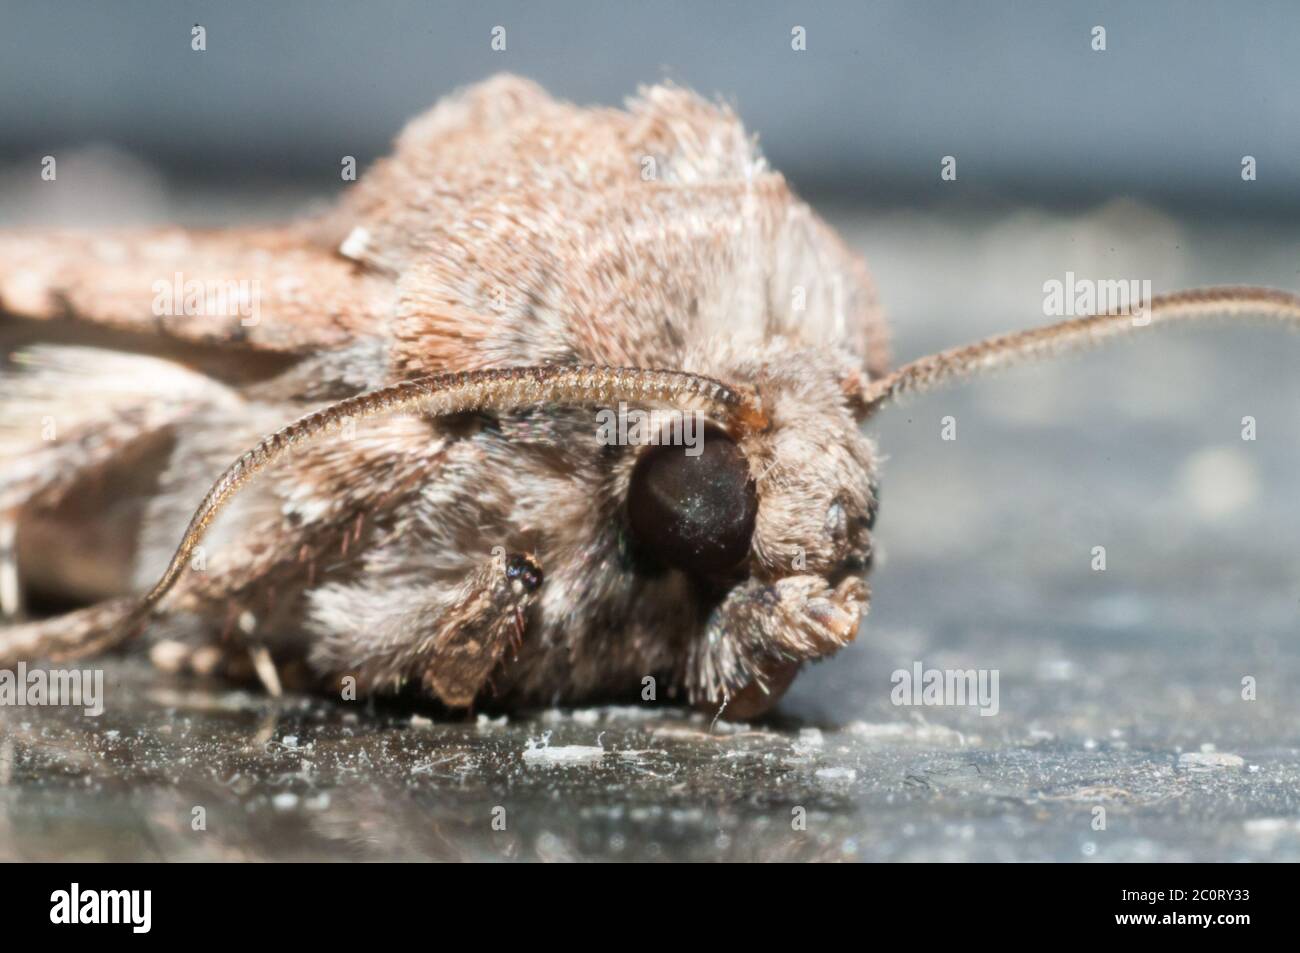 Night Insect Brown Moth Stock Photo